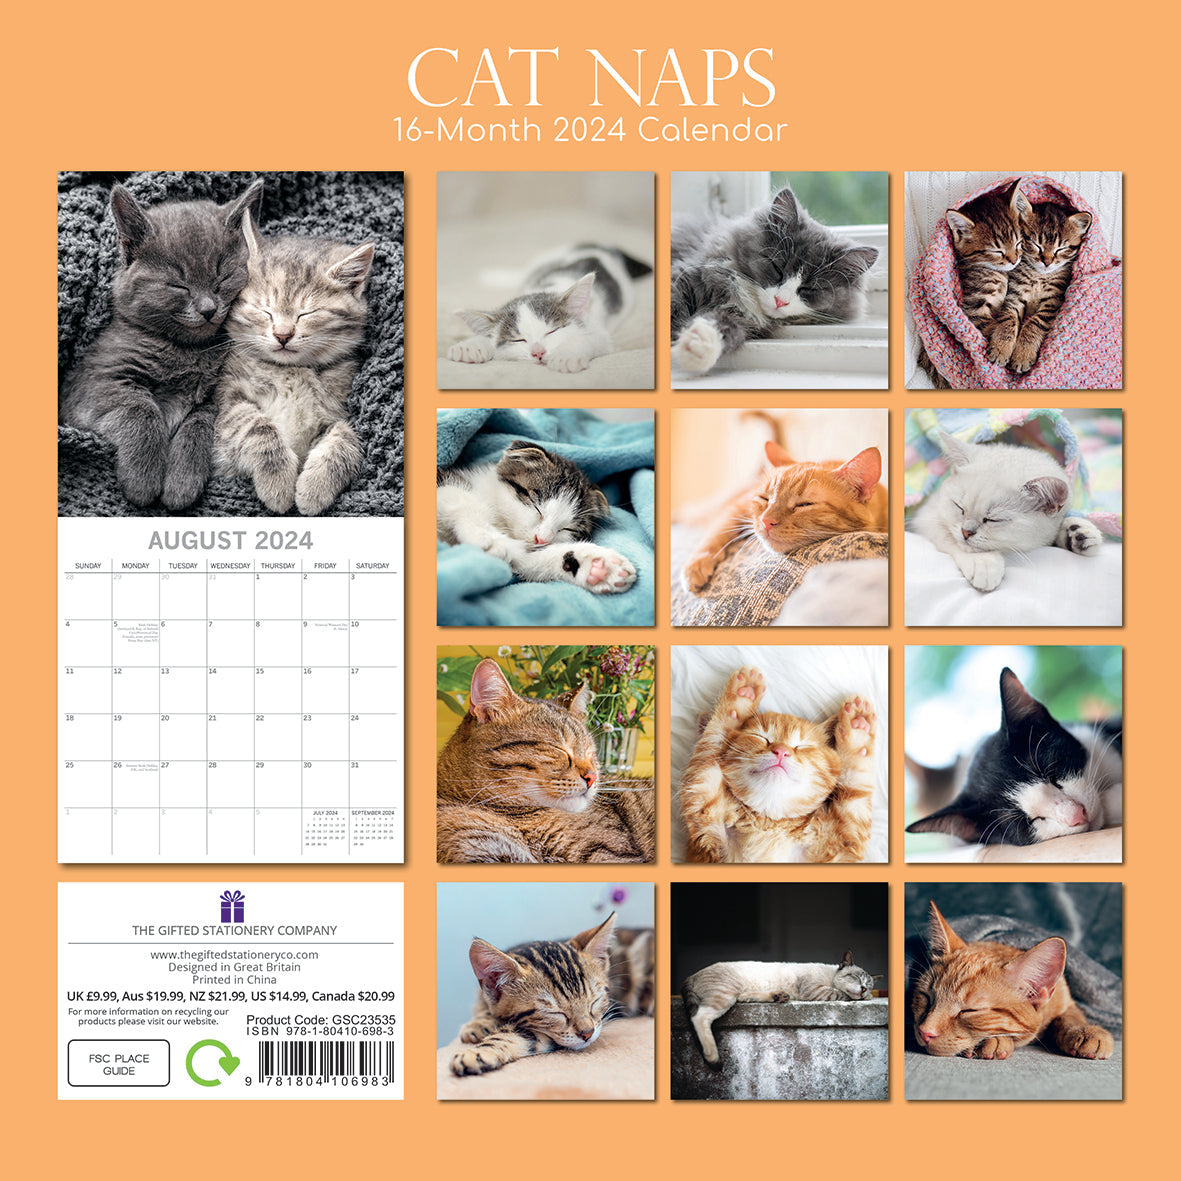 2024 Cat Naps - Square Wall Calendar - Cats & Kittens Calendars by The